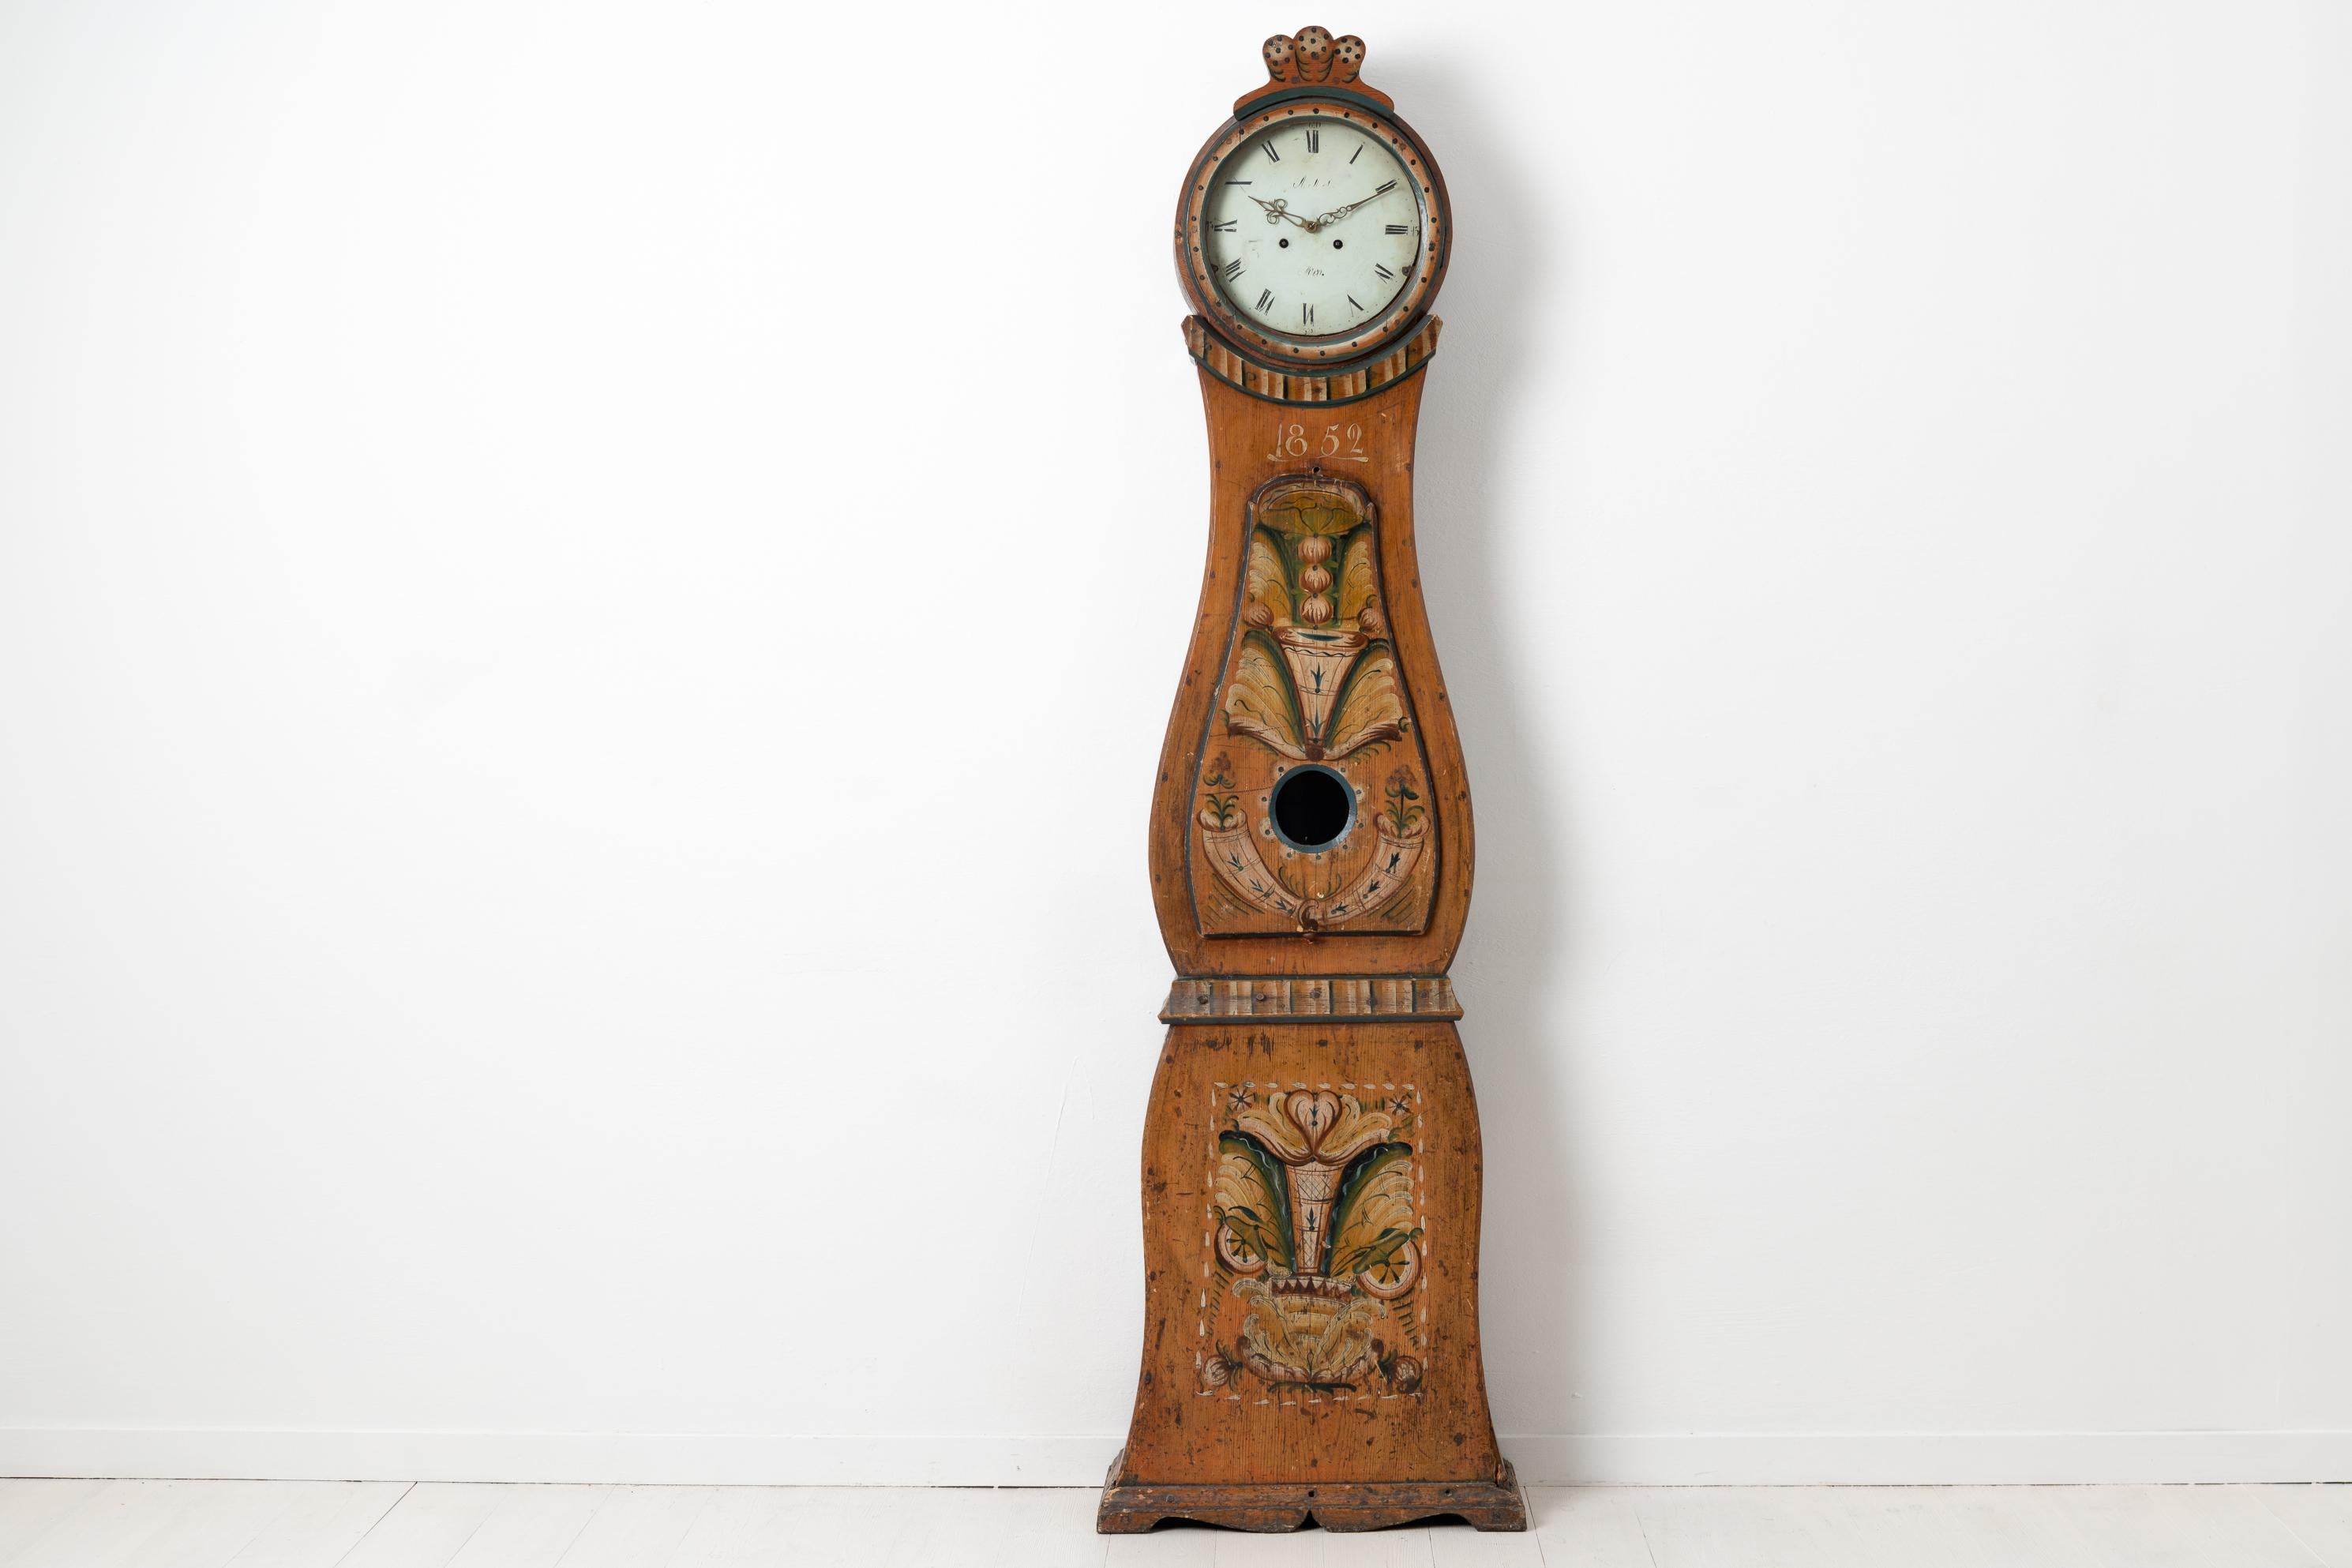 Classic Swedish Mora clock made in painted pine. The clock is from Hälsingland and has a simple model with rococo shapes. The paint is the original first layer which has remained untouched since 1852. It only has natural wear and an authentic patina